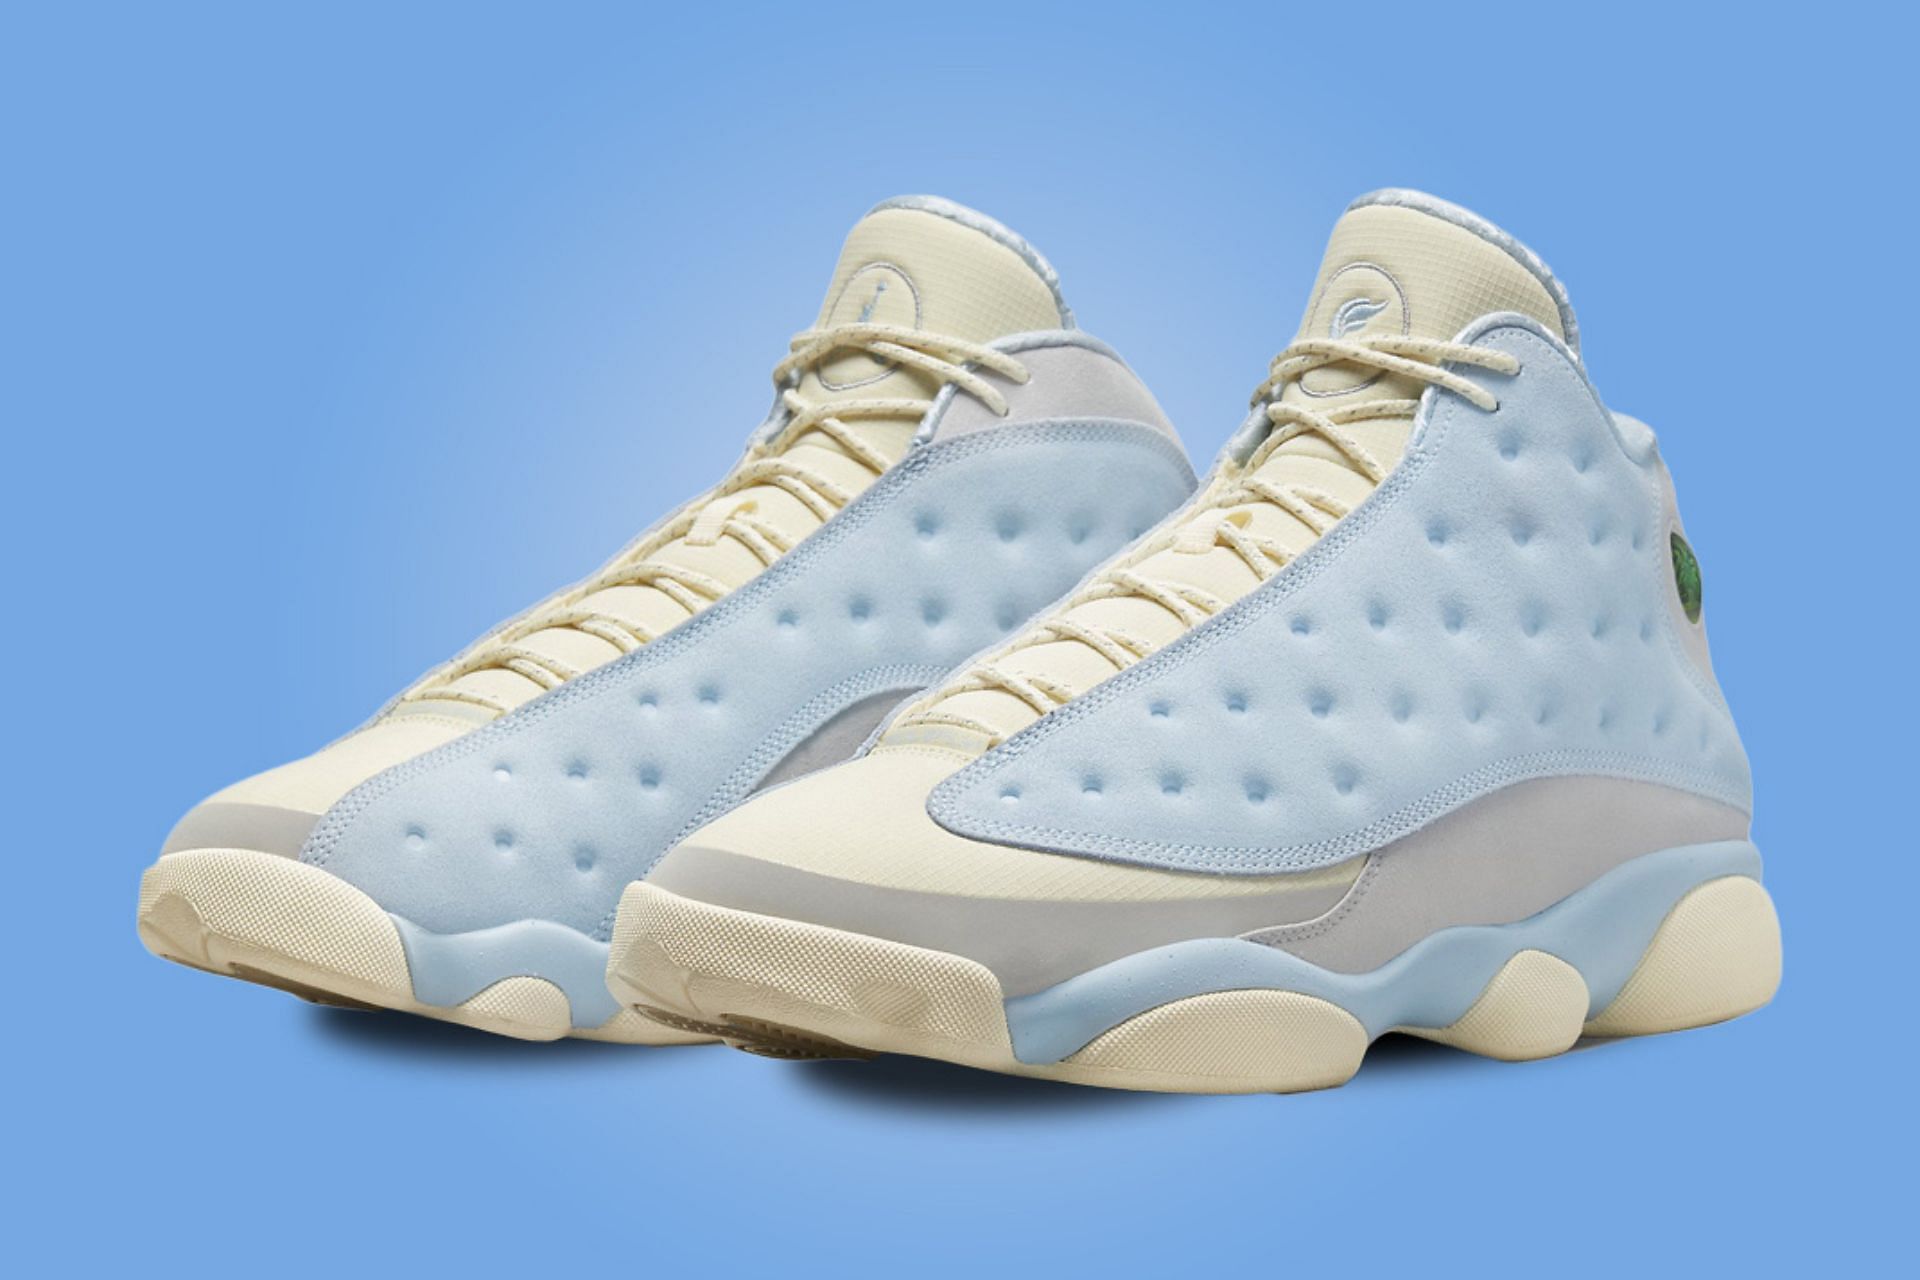 Where to buy SoleFly x Air Jordan 13? Release date, and more explored